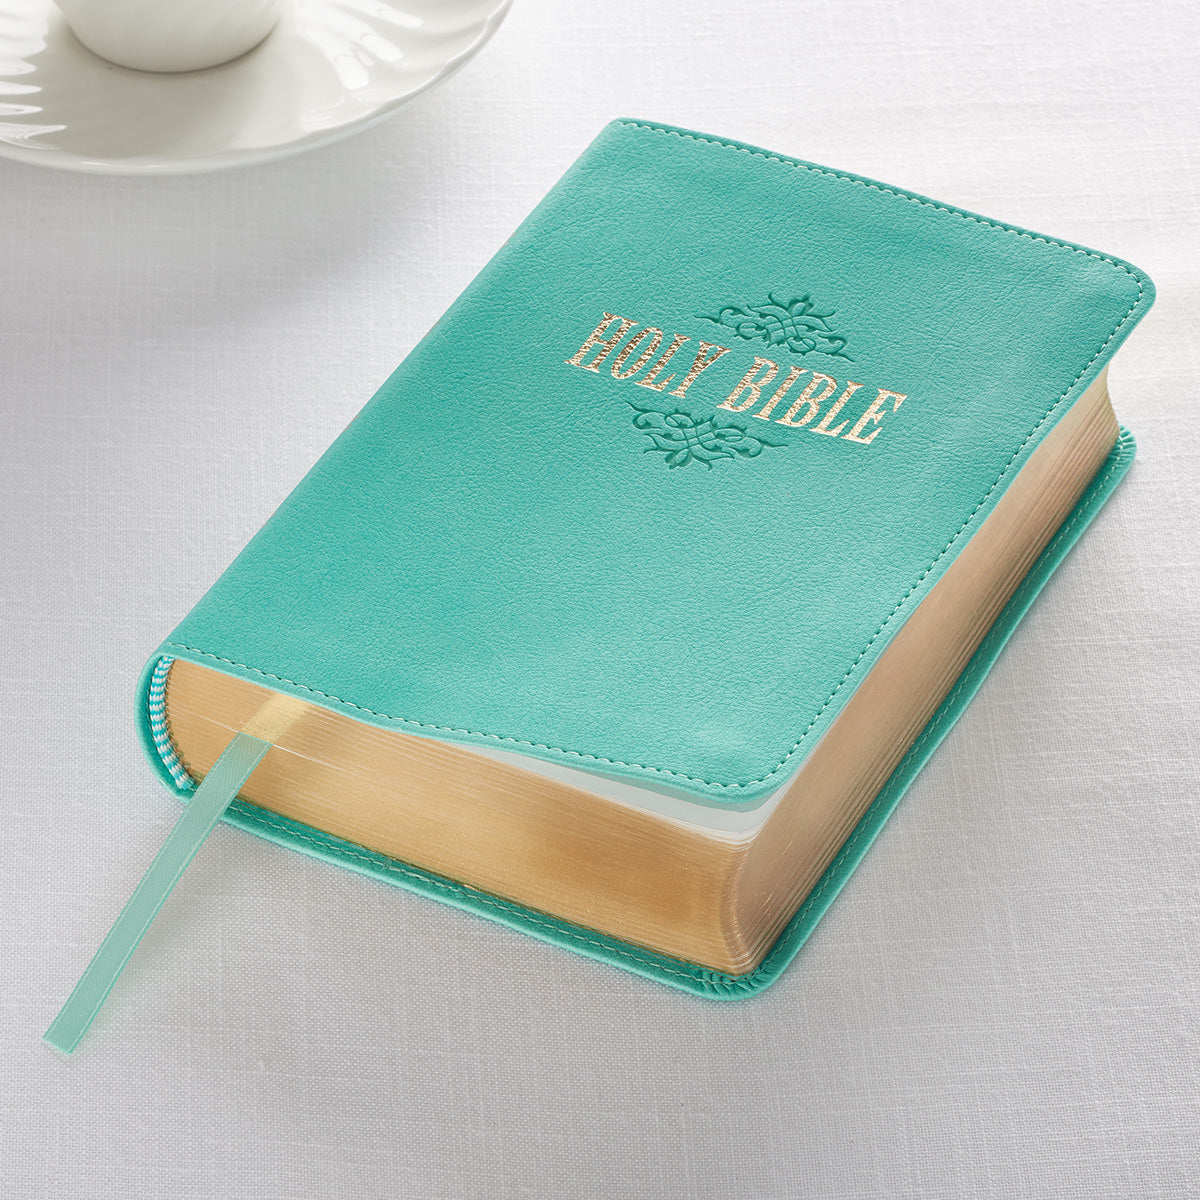 Image of KJV Compact Large Print Lux-Leather Teal other